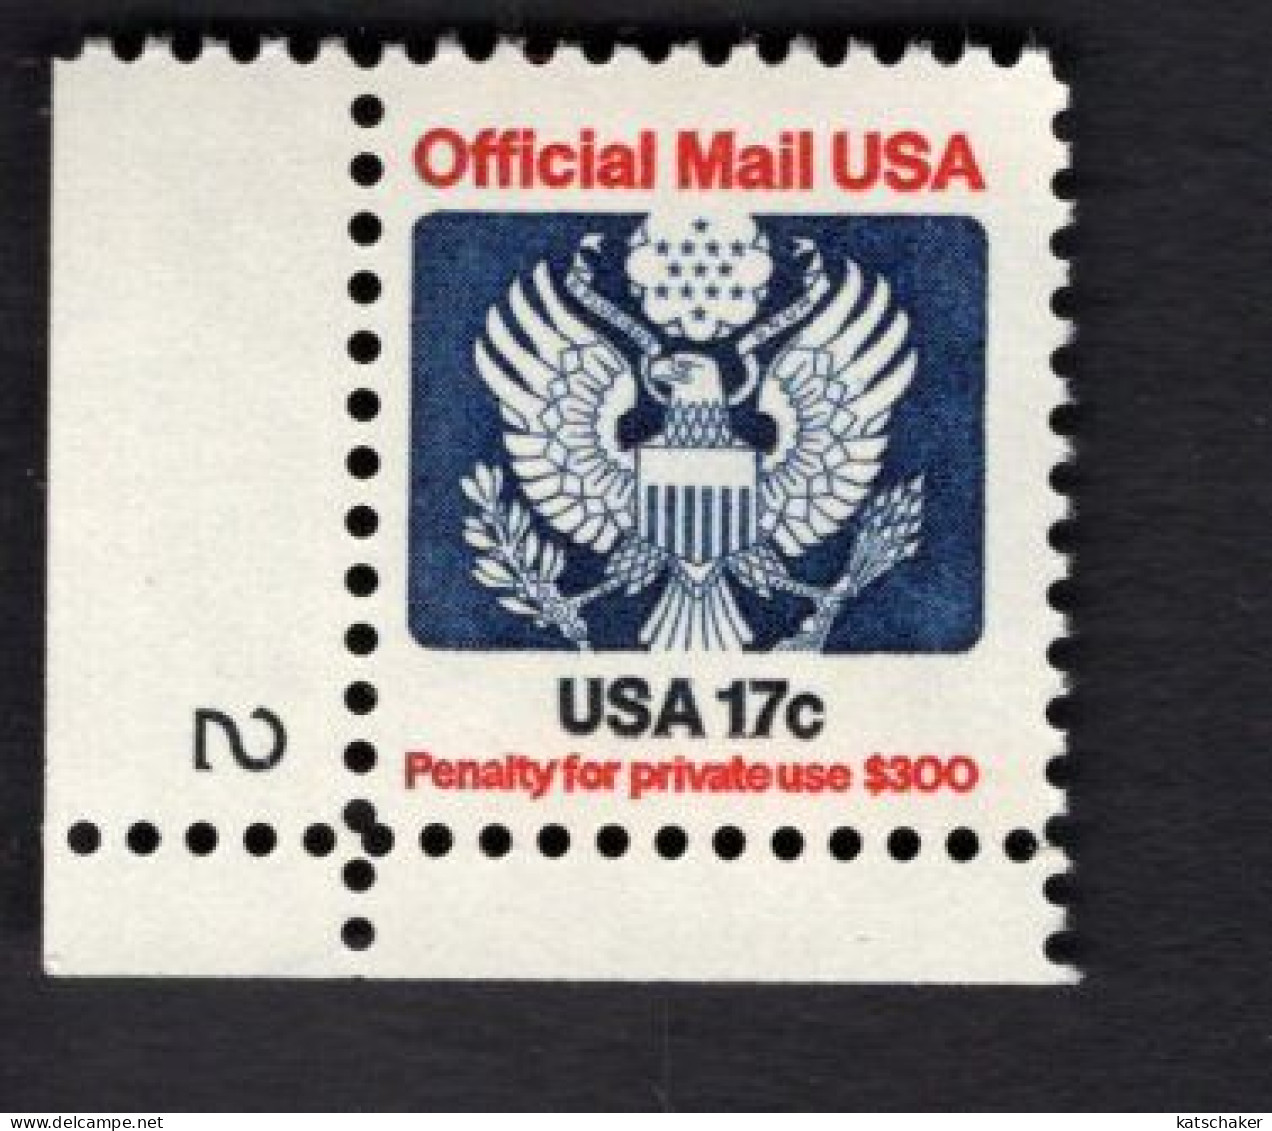 2008954892 1983 SCOTT O130 (XX)  POSTFRIS MINT NEVER HINGED - EAGLE AND SHIELD OFFICIAL MAIL - PLATE NUMBER 2 - Officials